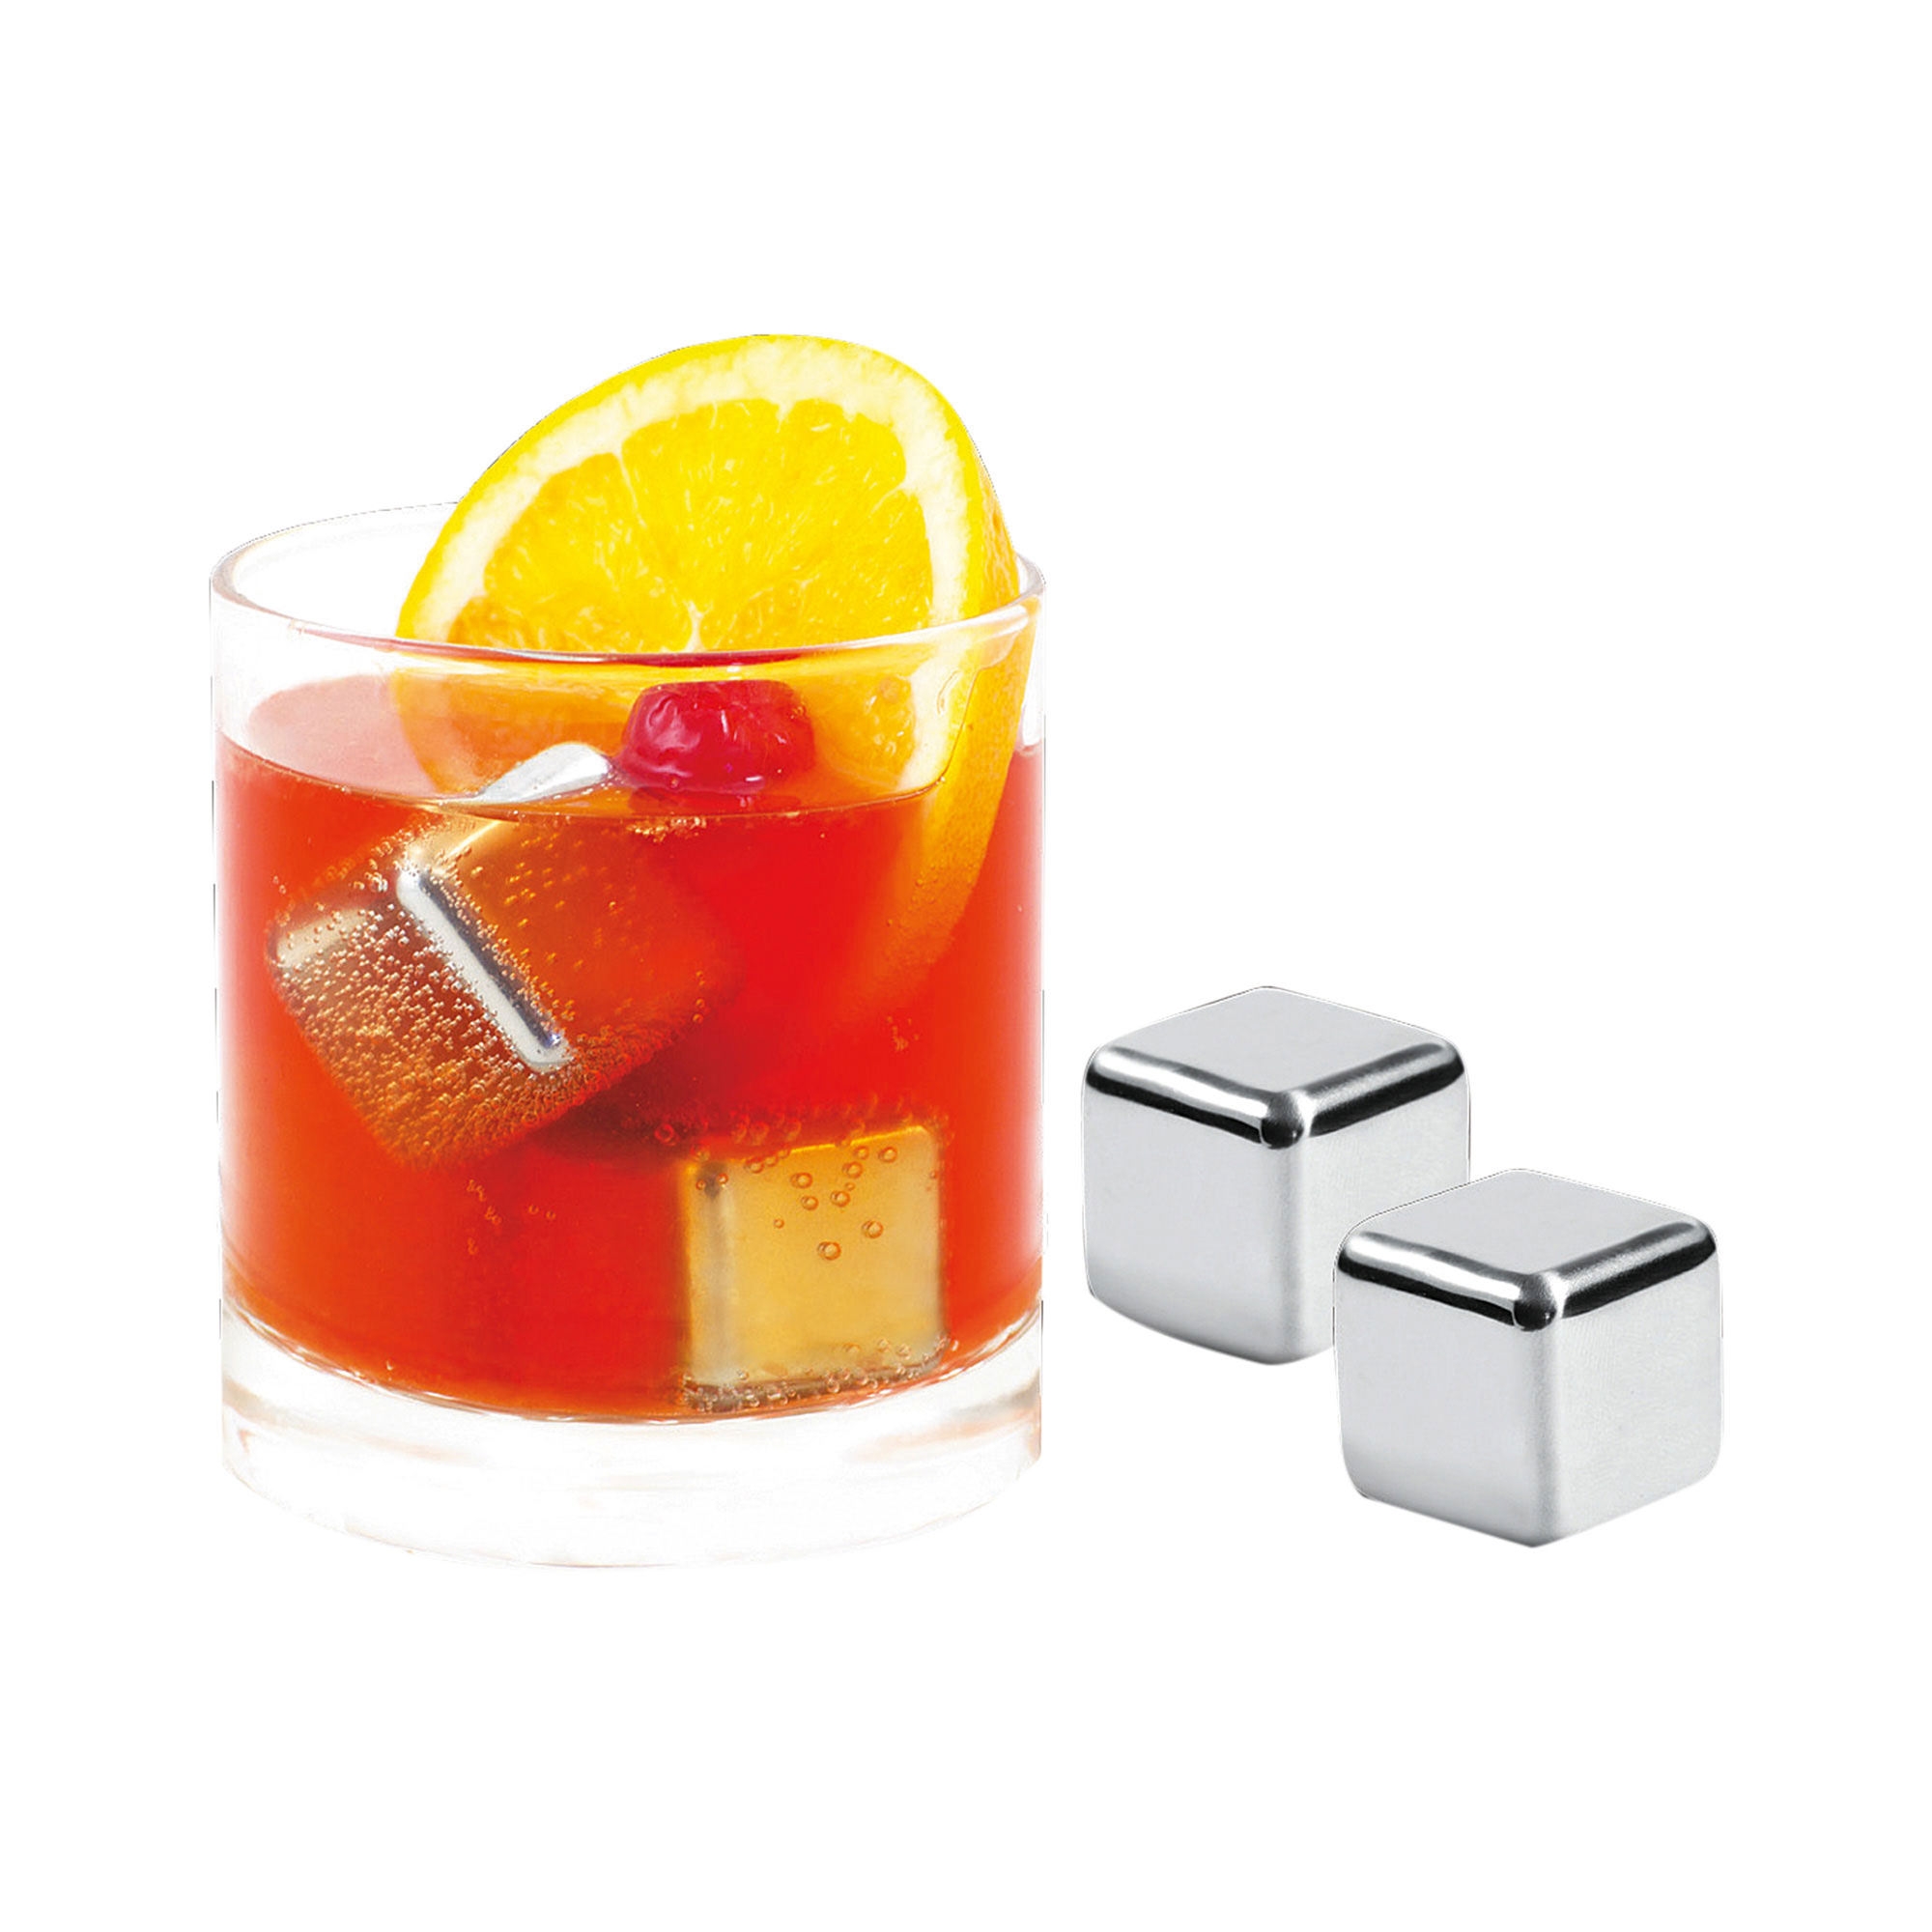 Avanti Stainless Steel Ice Cubes With Velvet Pouch Set of 4 Image 1